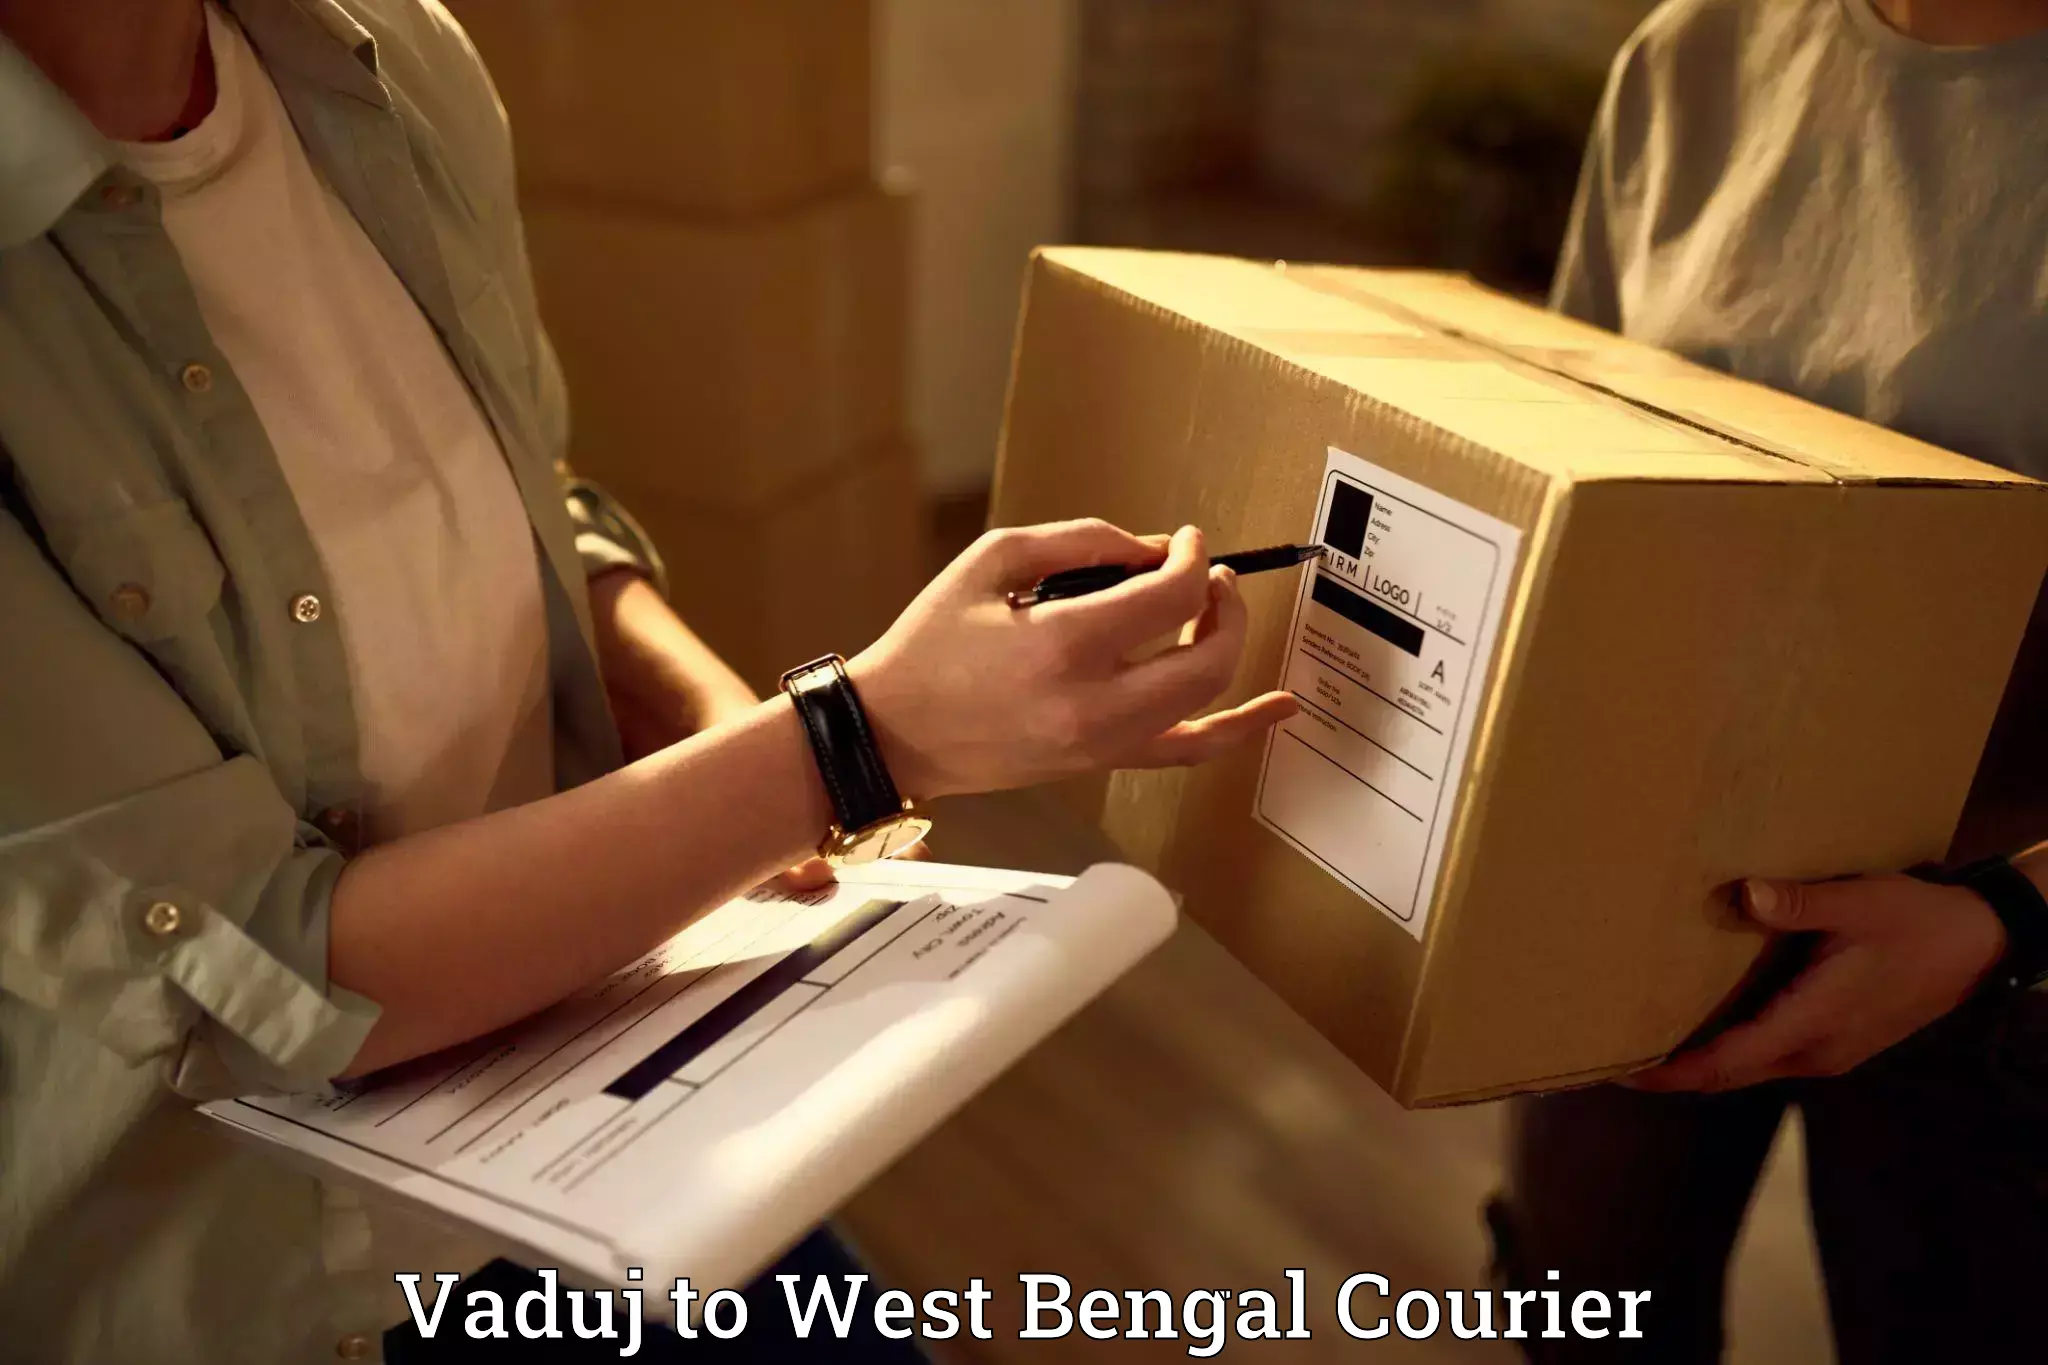 Furniture delivery service Vaduj to West Bengal